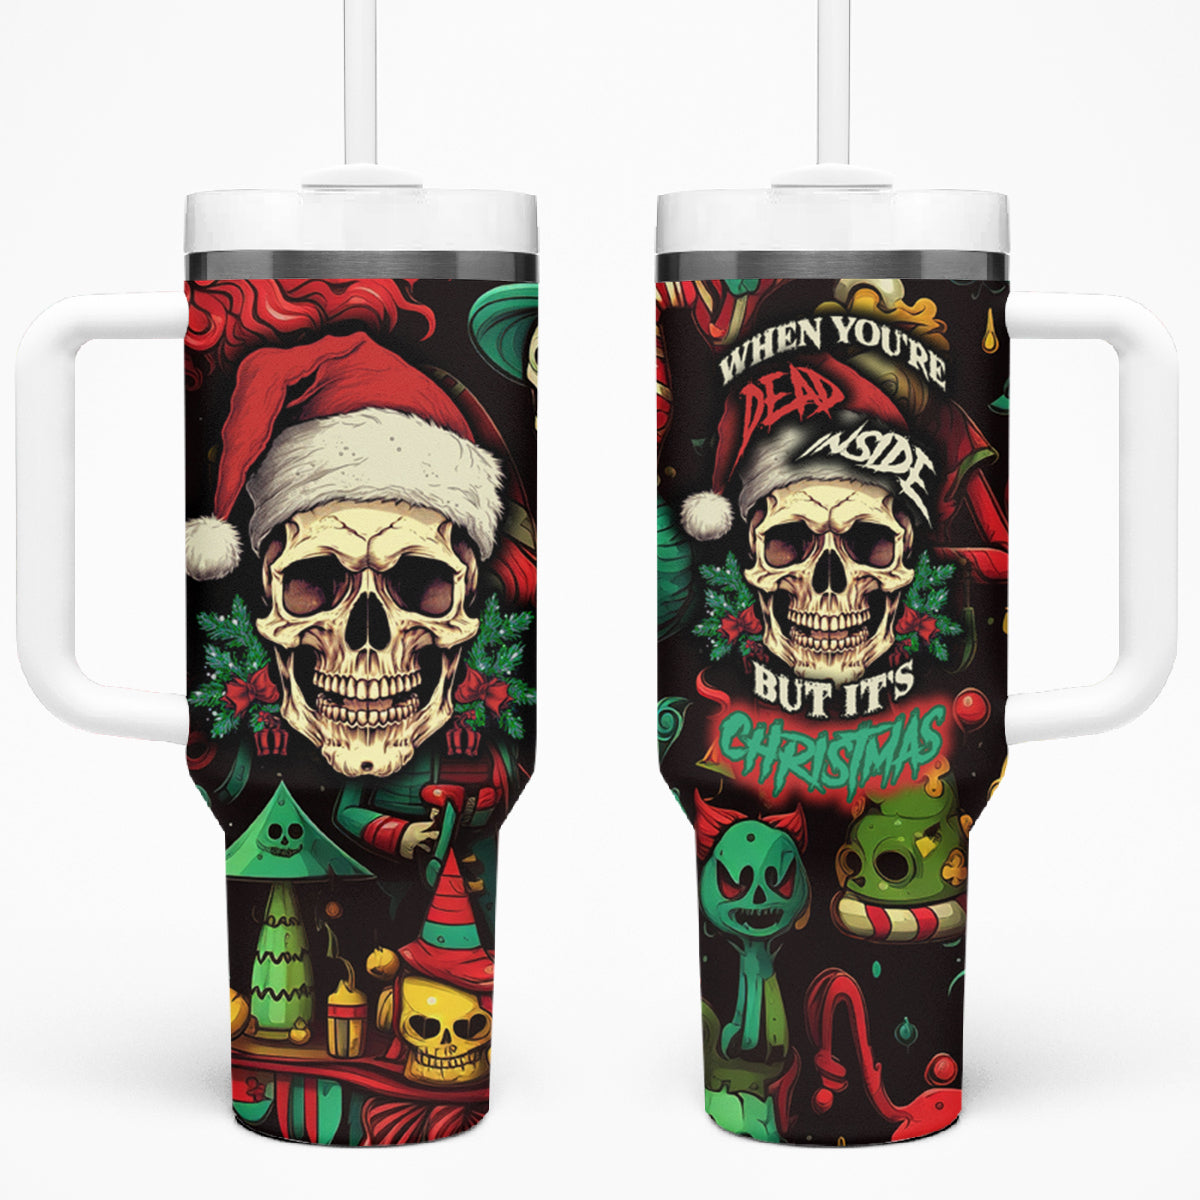 Skull Christmas Tumbler With Handle When You're Dead Inside But It's Christmas